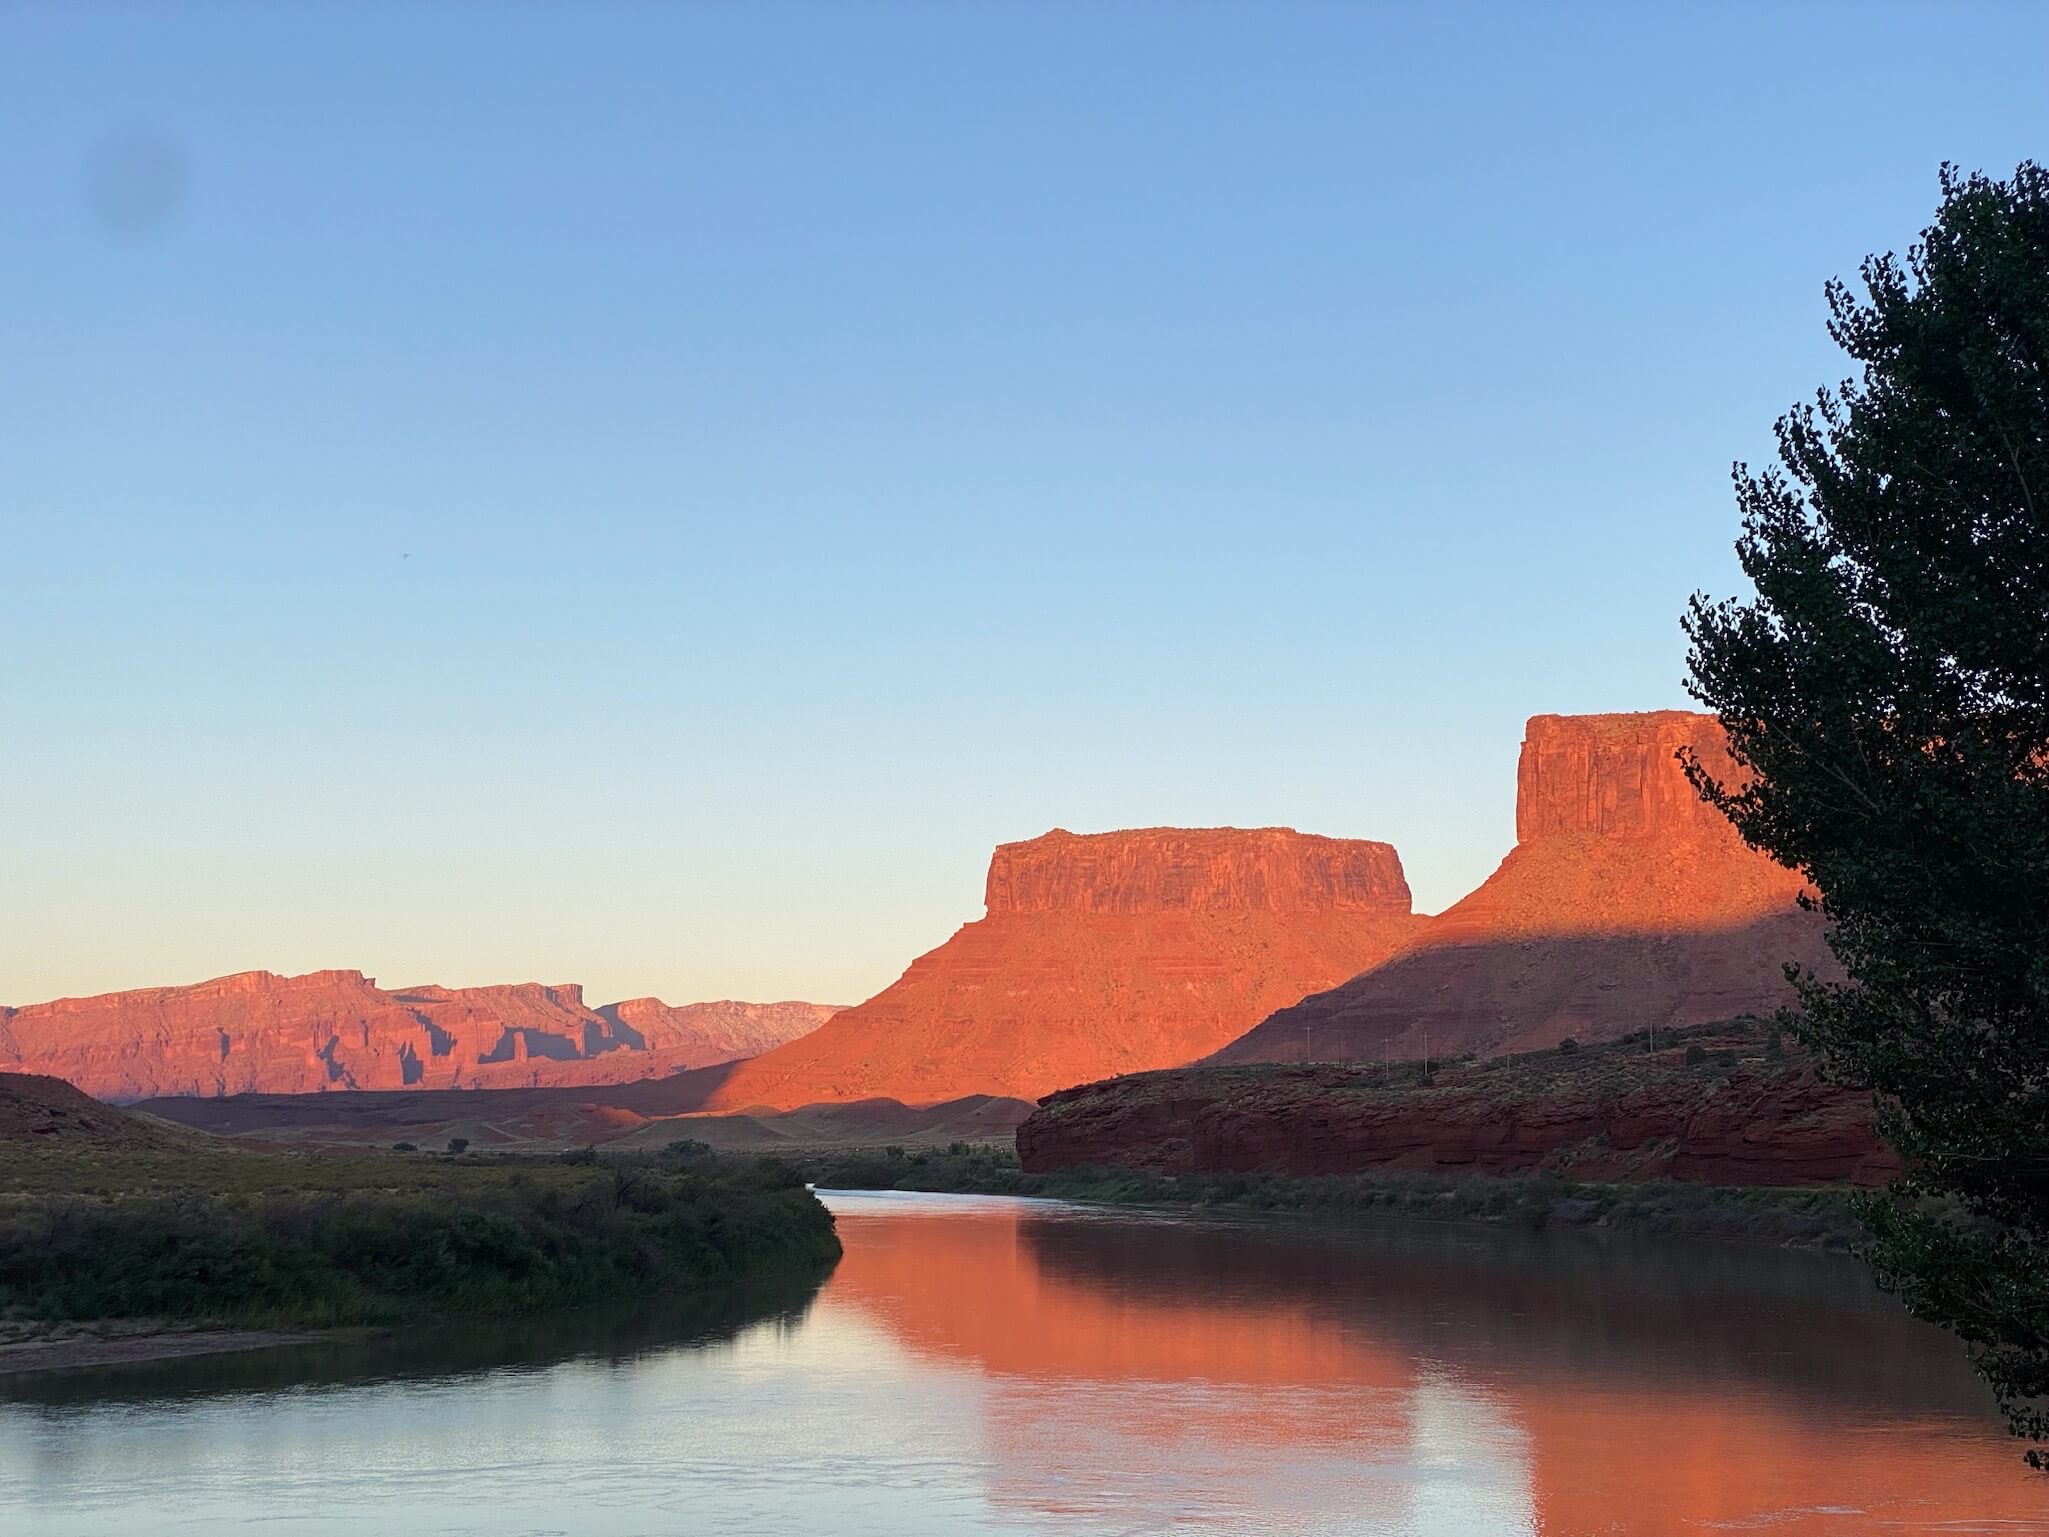 Iconic colors along the banks of the Colorado River